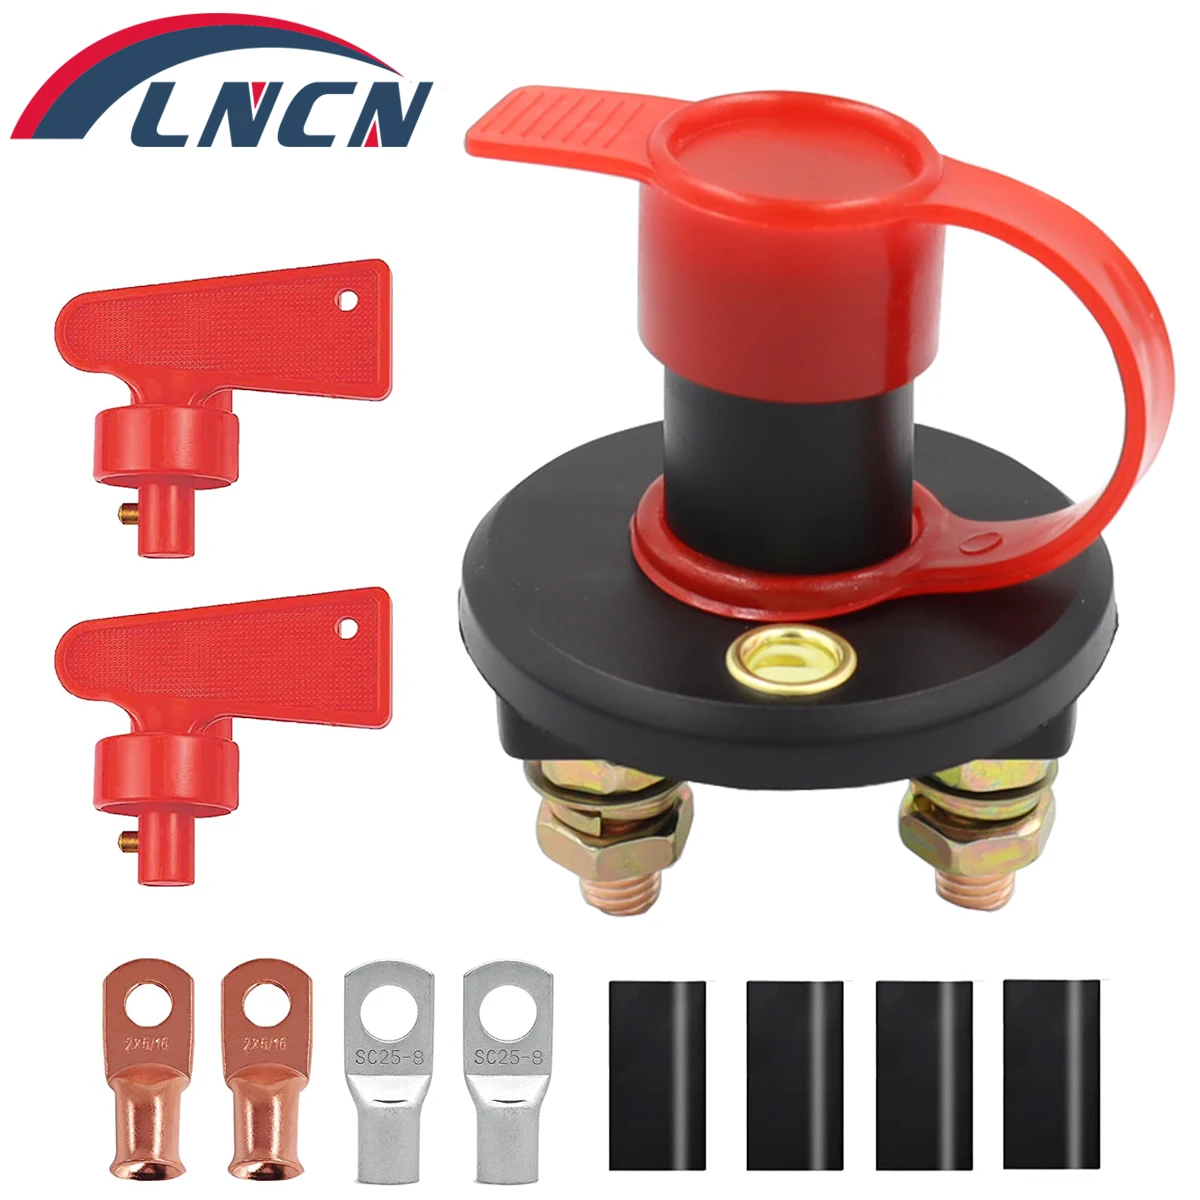 

12V/24V Car Battery Power Switch Disconnect Isolator Circuit Breaker Main Switch Kill Cut-off Switch Insulated Rotary Switch Key